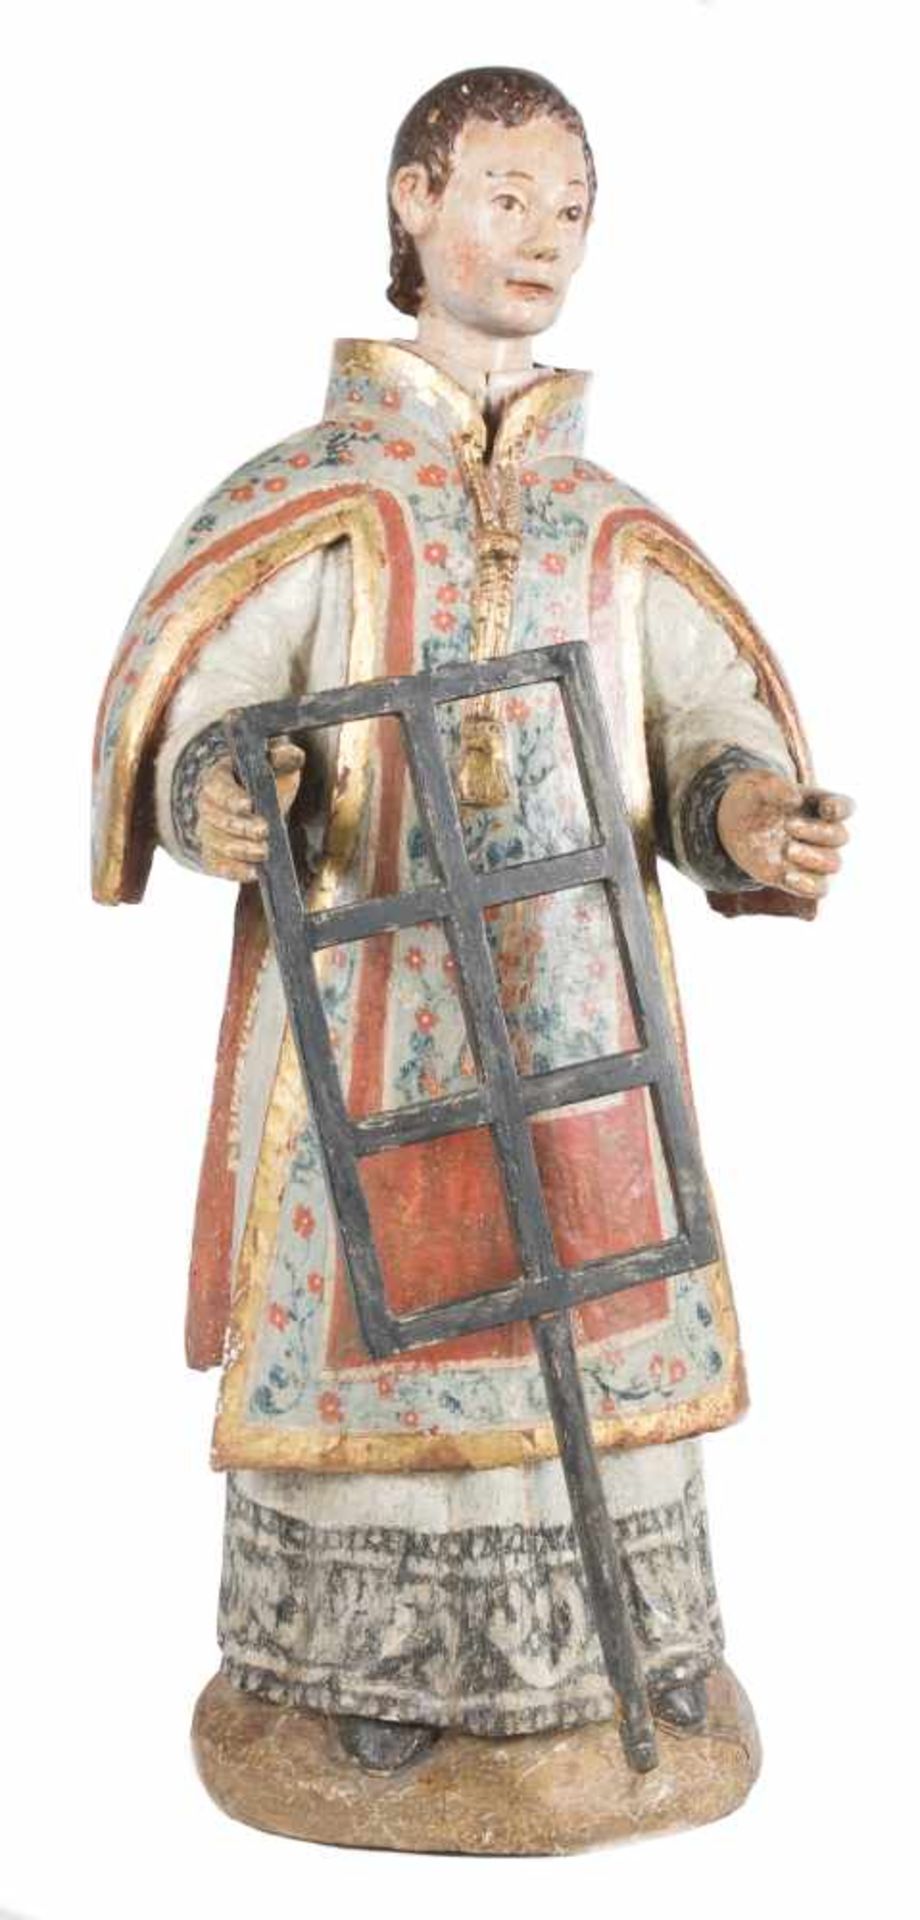 "Lawrence of Rome". Carved, polychromed and gilded wooden sculpture. 17th century.